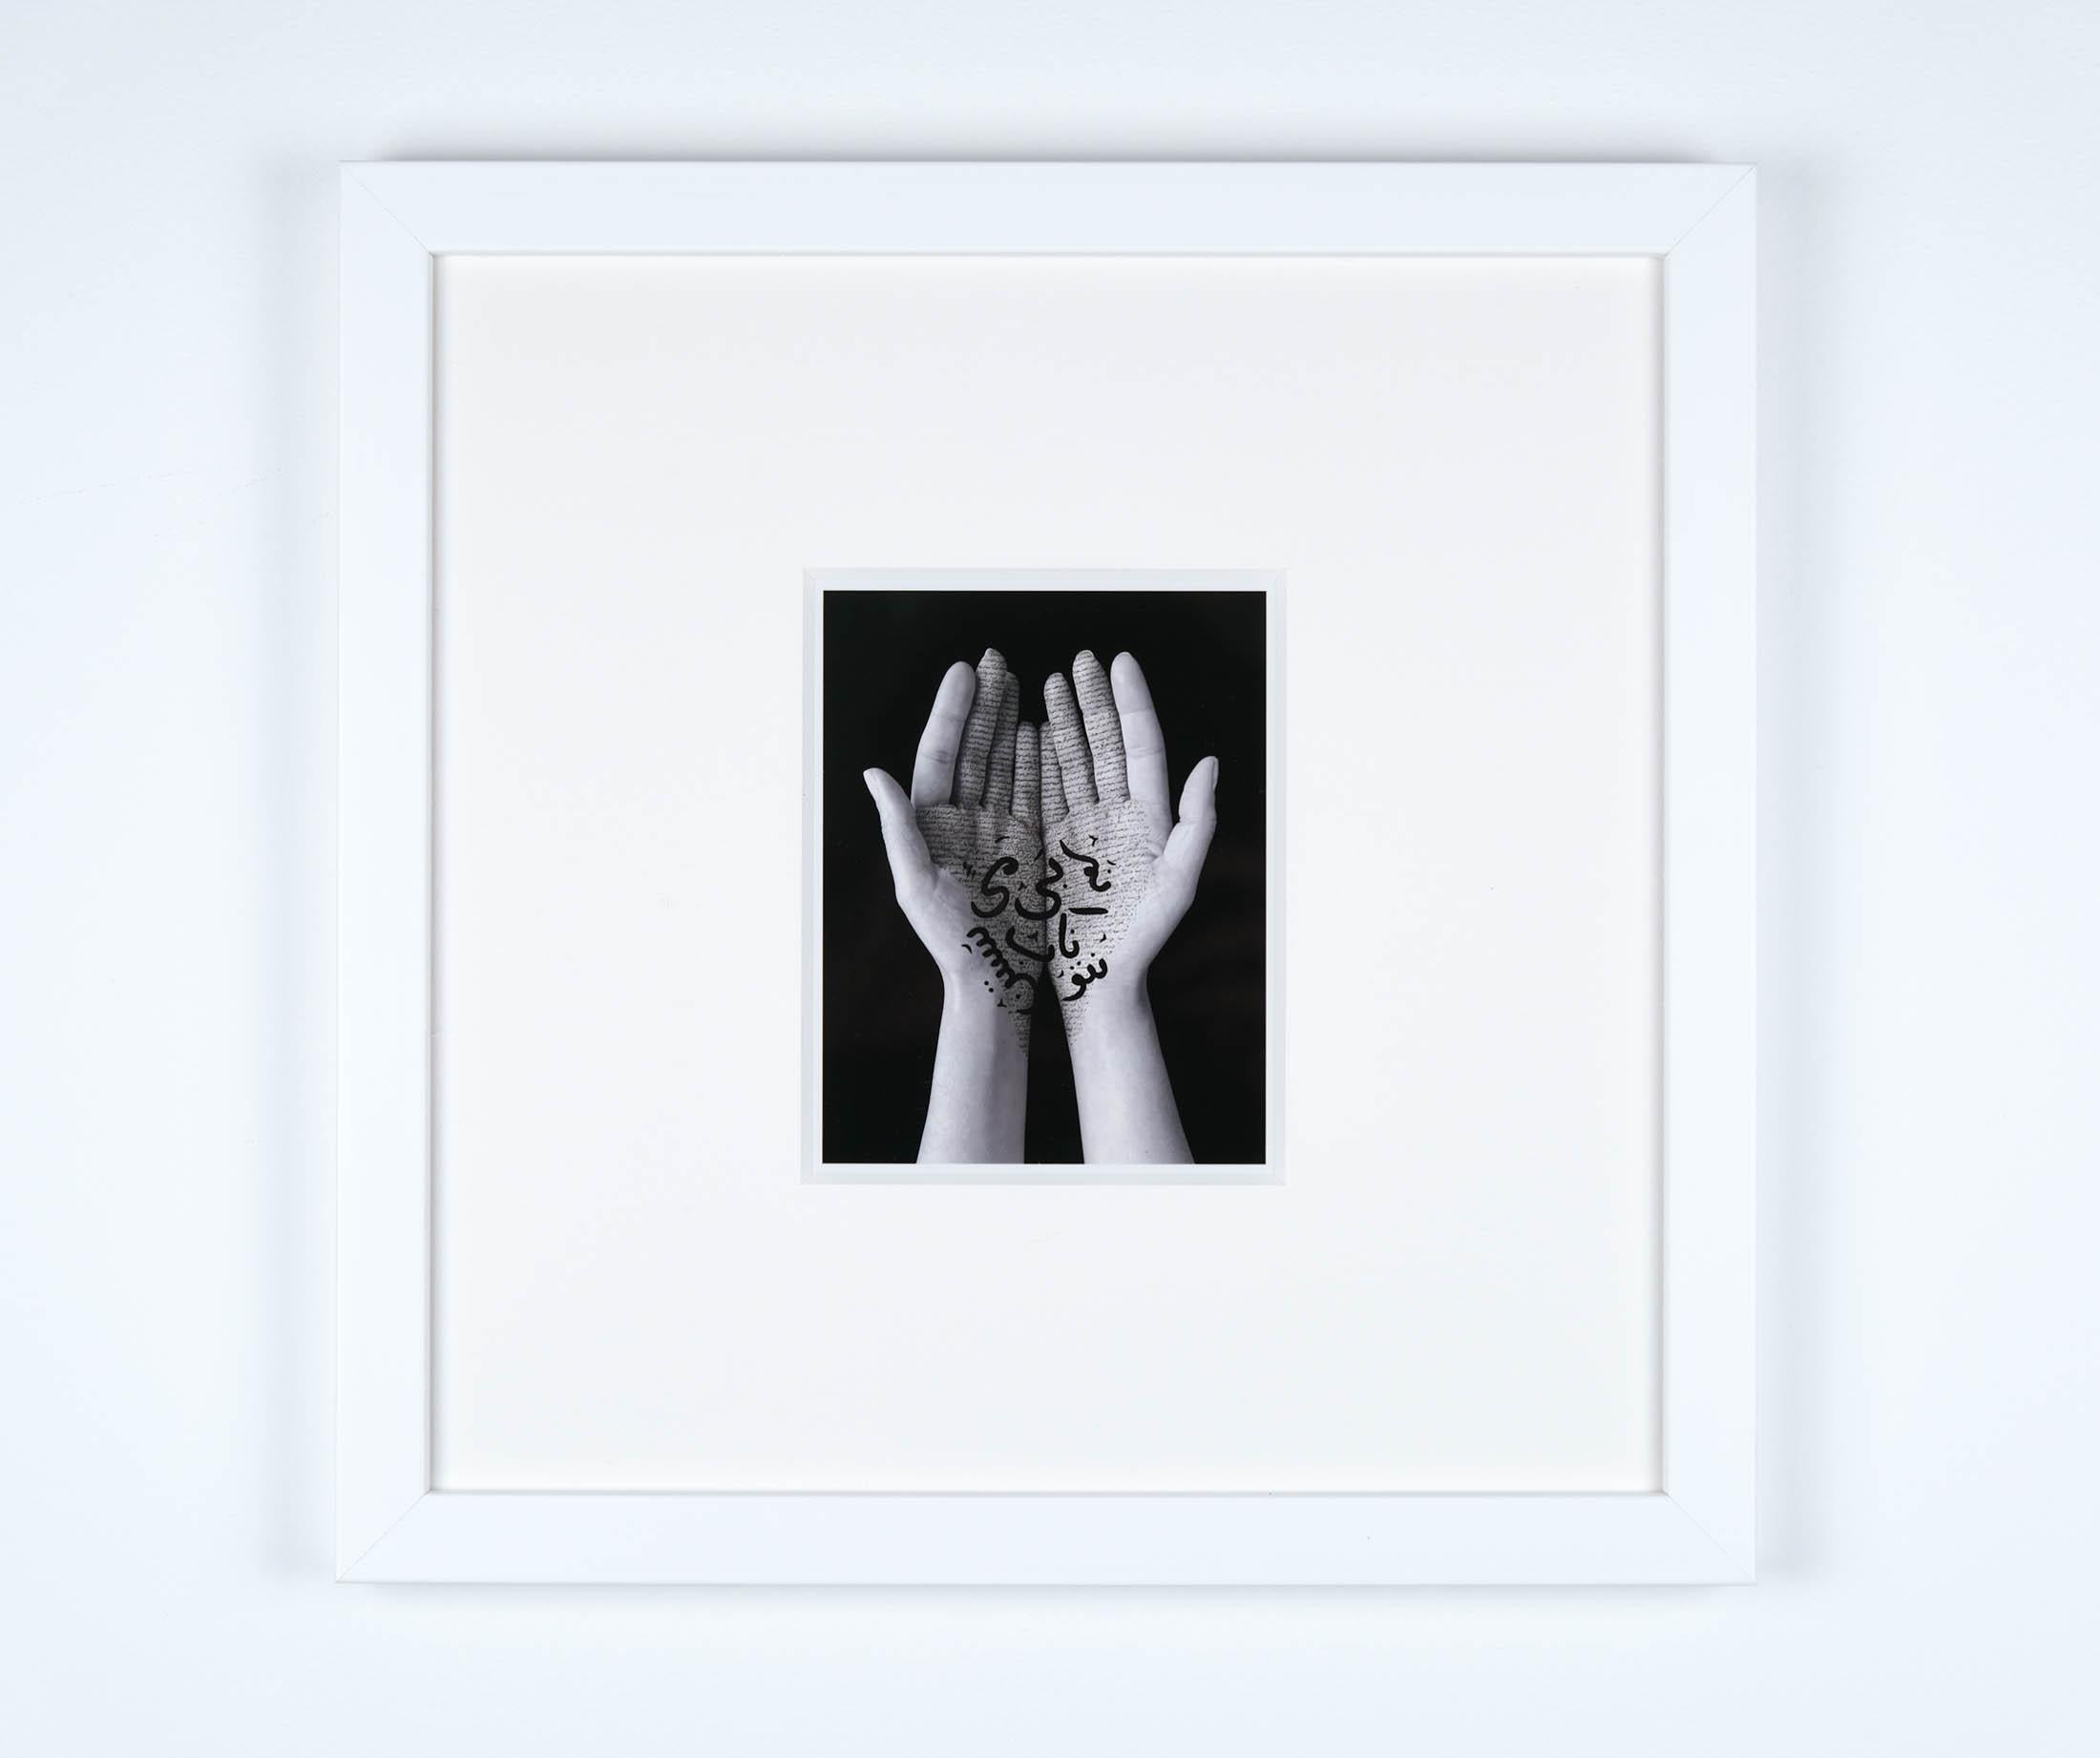 For sale an original limited edition signed museum-quality Magnum 6x6 photographic print by renowned artist SHIRIN NESHAT. The photograph is from the artist's 